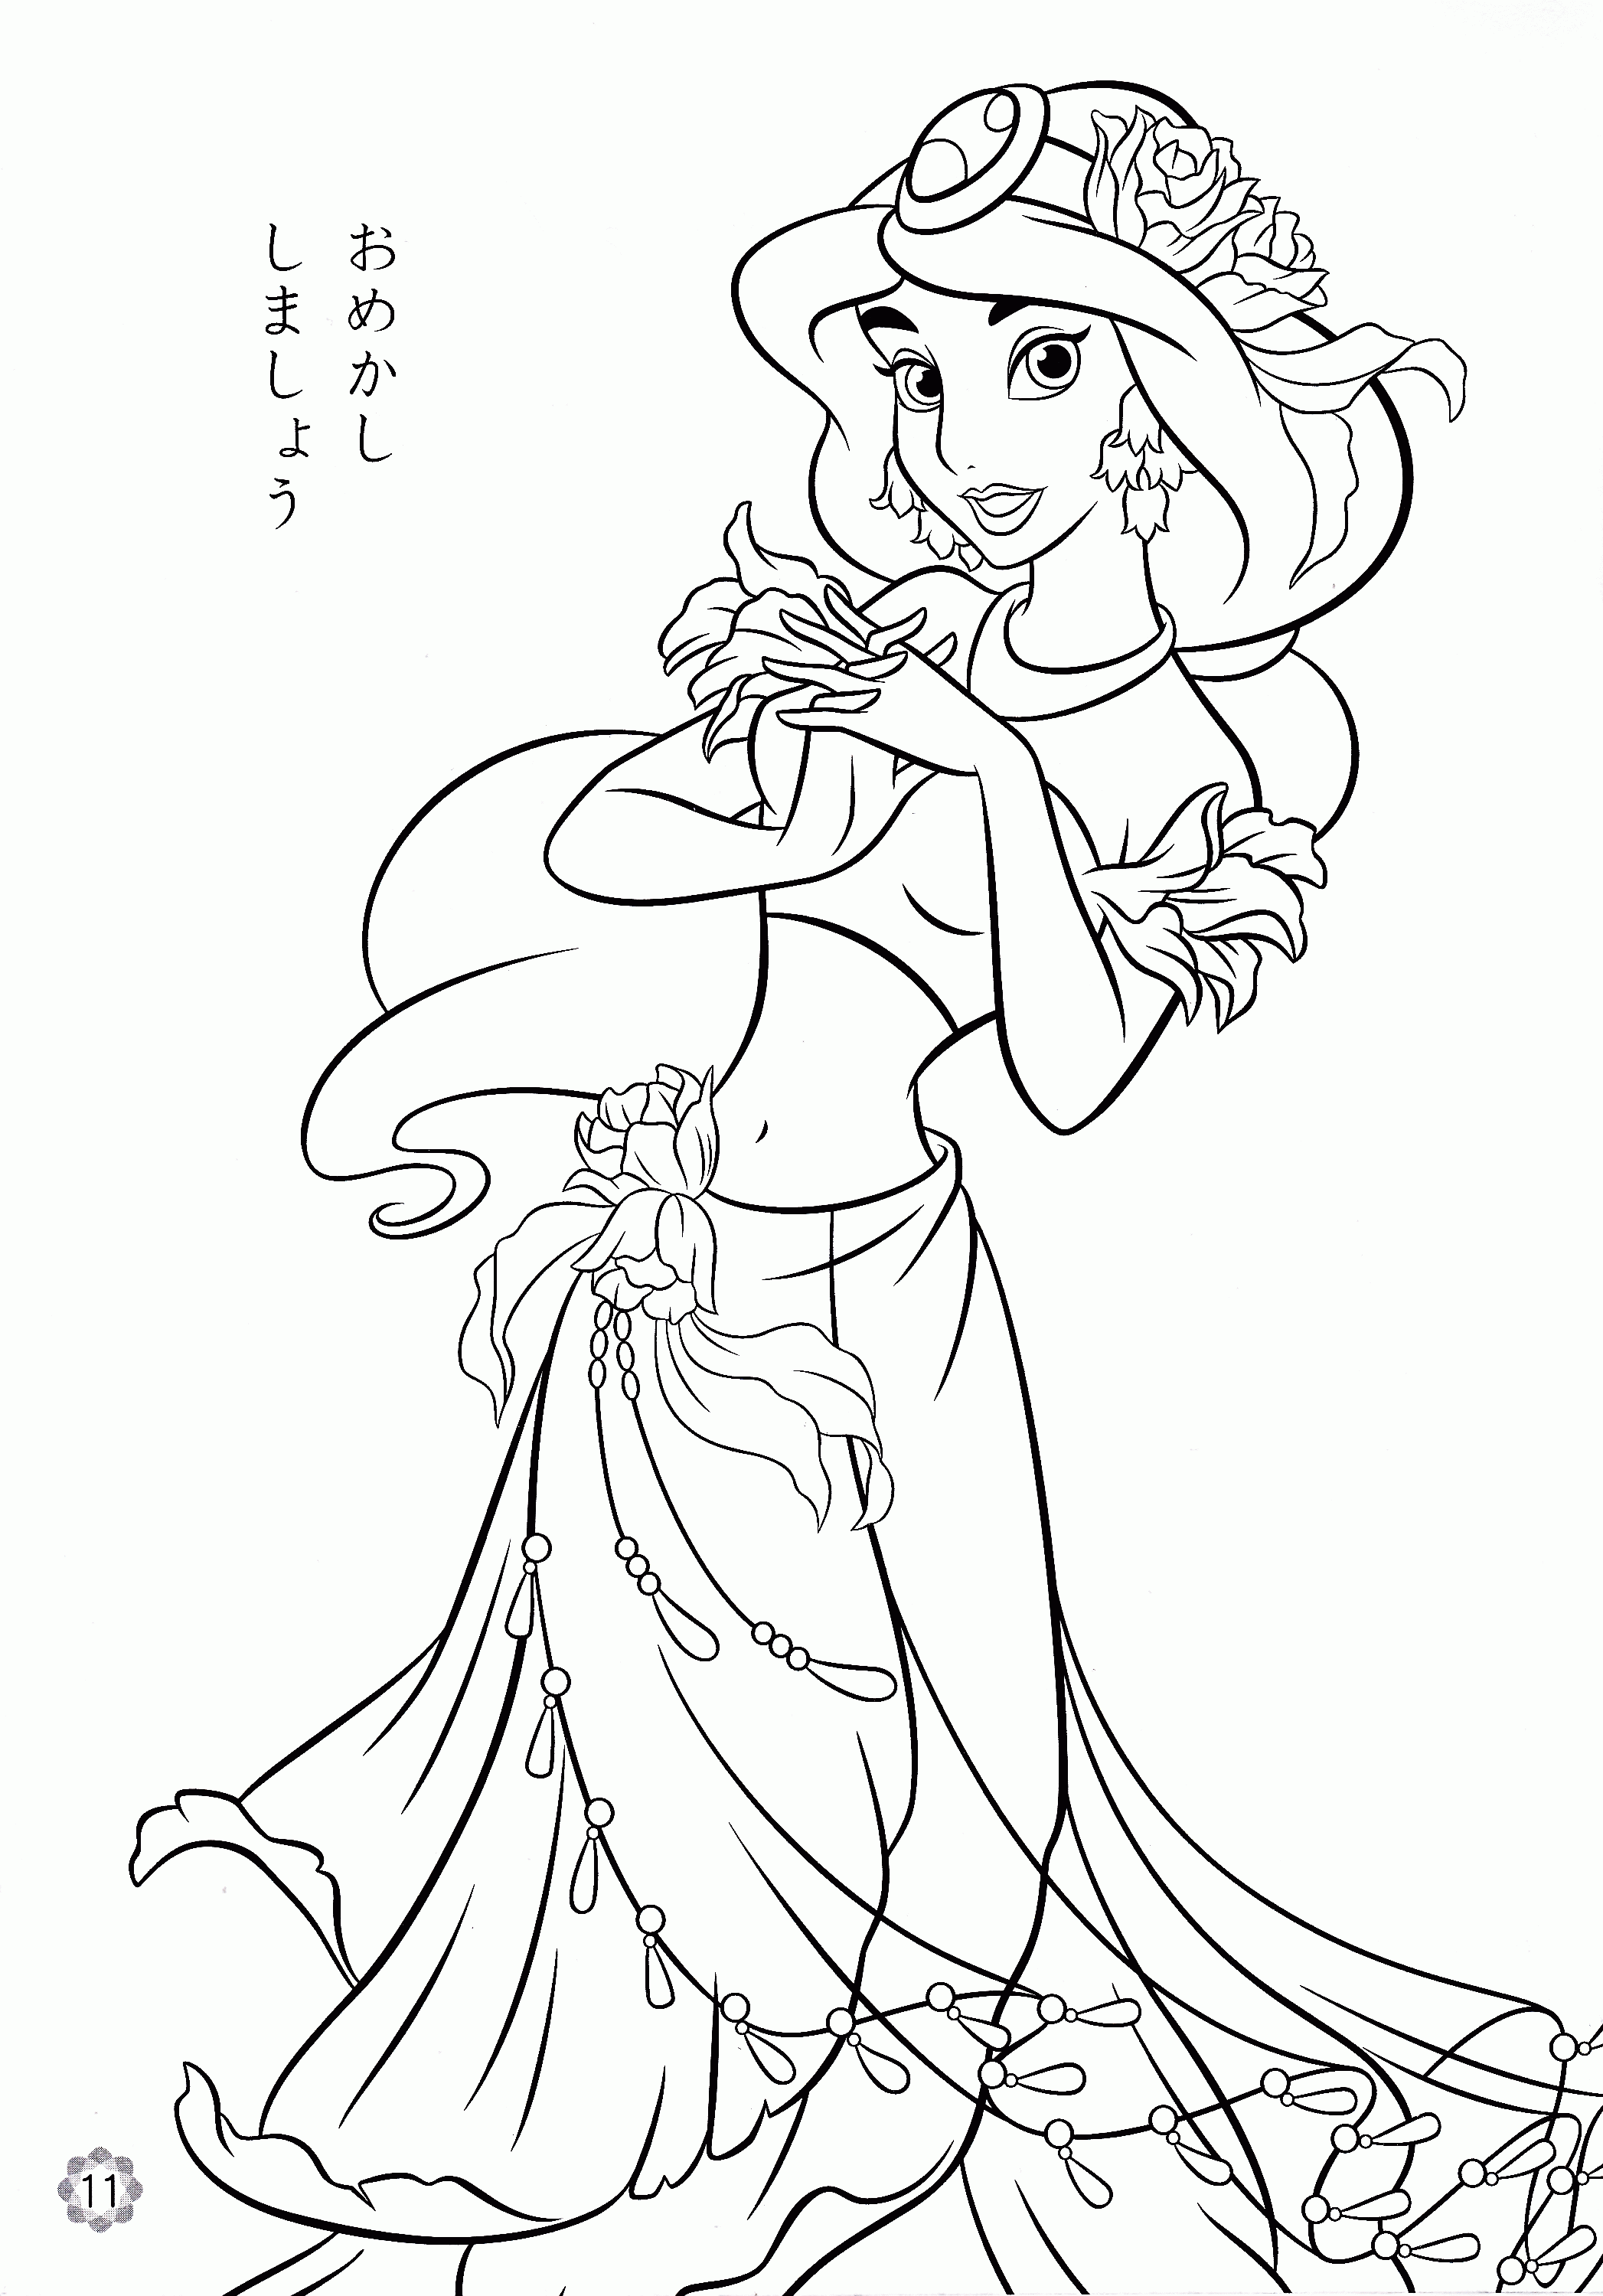 All Princess Together Coloring Pages - Coloring Pages For All Ages